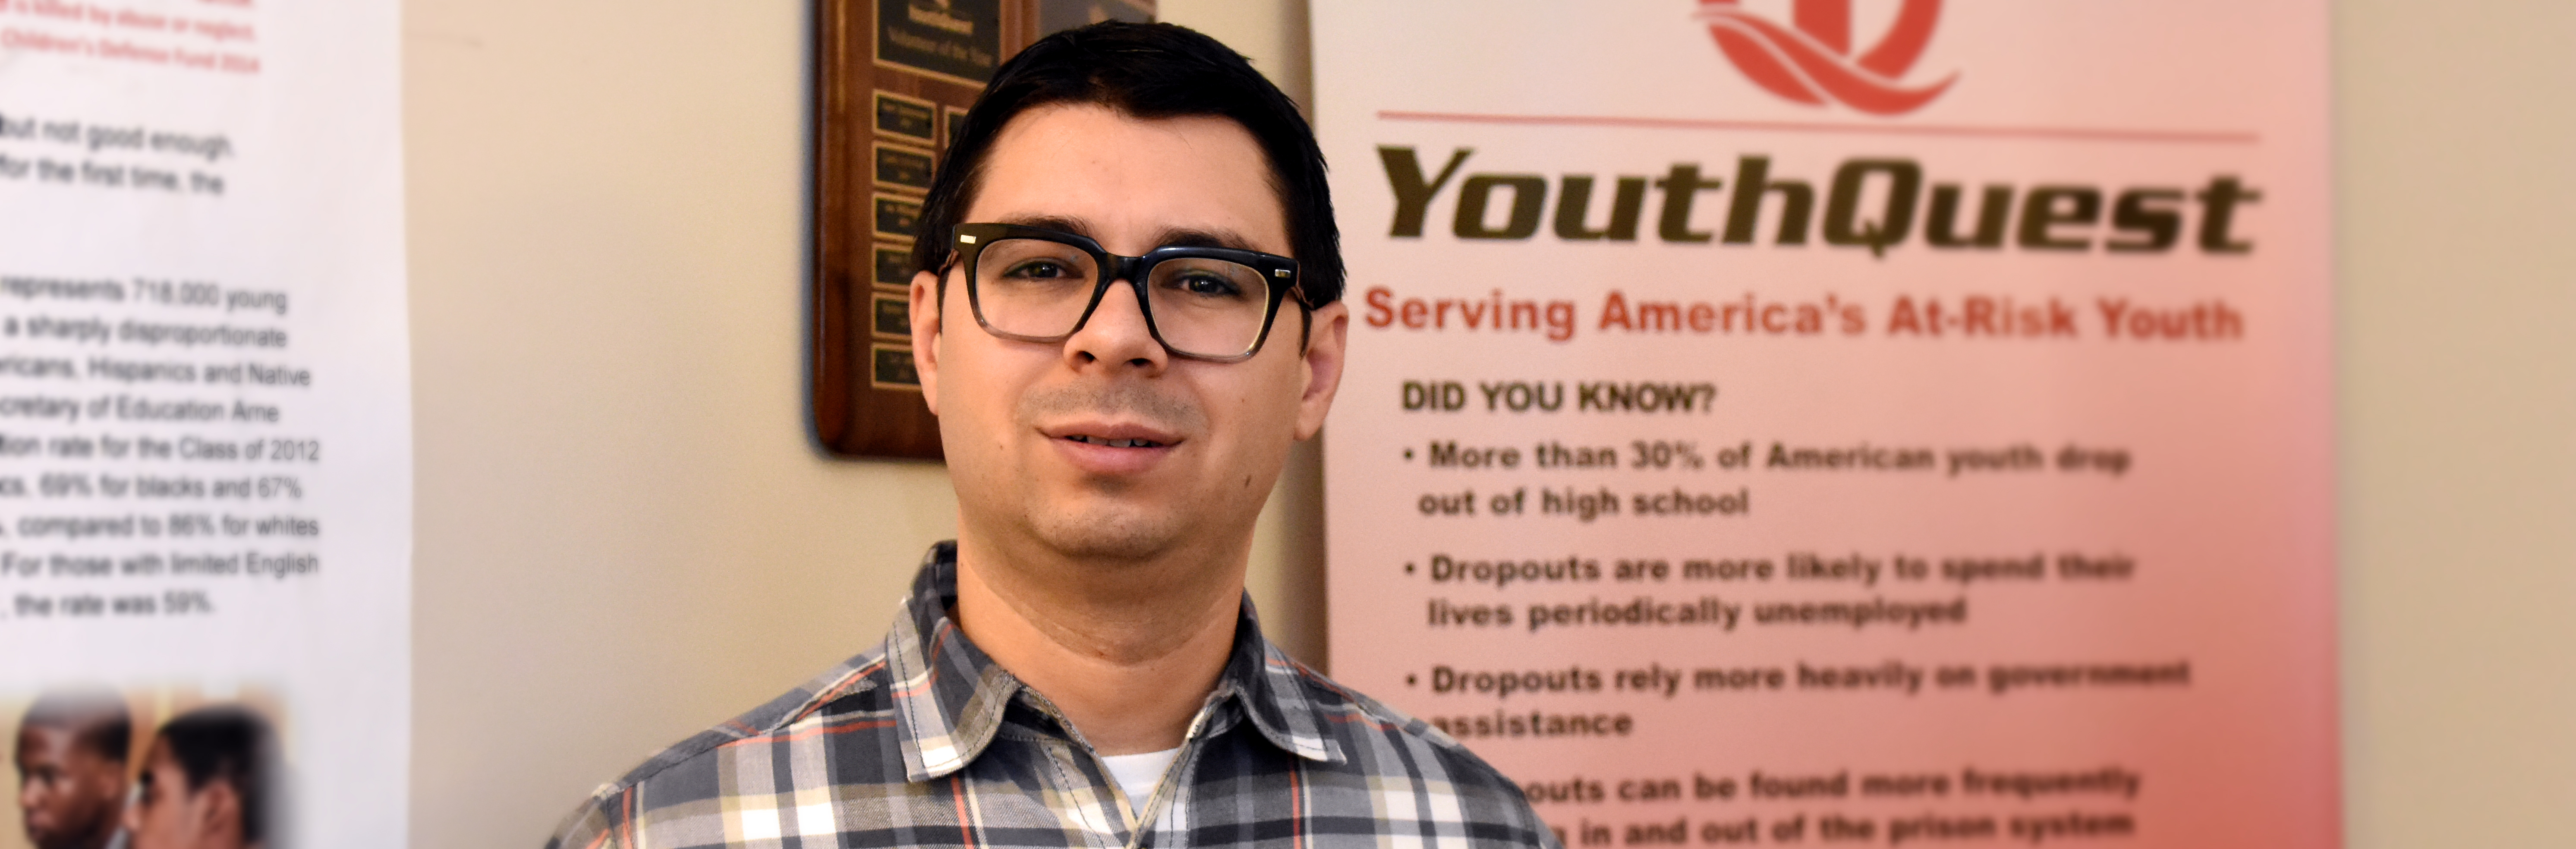 YouthQuest Foundation Operations Manager Juan Louro